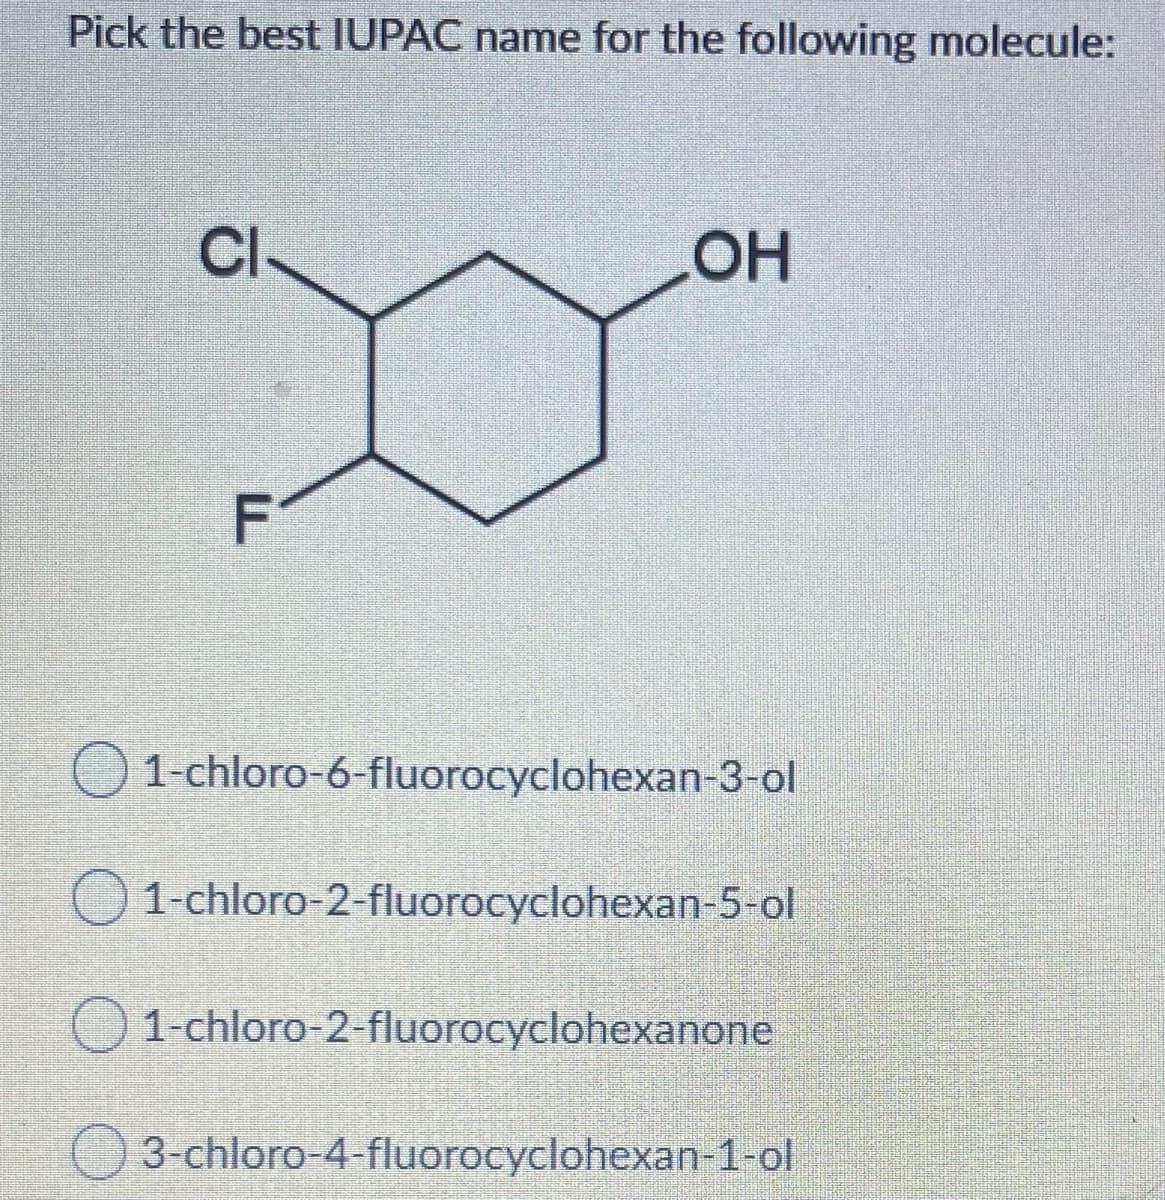 Pick the best IUPAC name for the following molecule:
Cl-
OH
F
1-chloro-6-fluorocyclohexan-3-ol
1-chloro-2-fluorocyclohexan-5-ol
1-chloro-2-fluorocyclohexanone
3-chloro-4-fluorocyclohexan-1-ol
